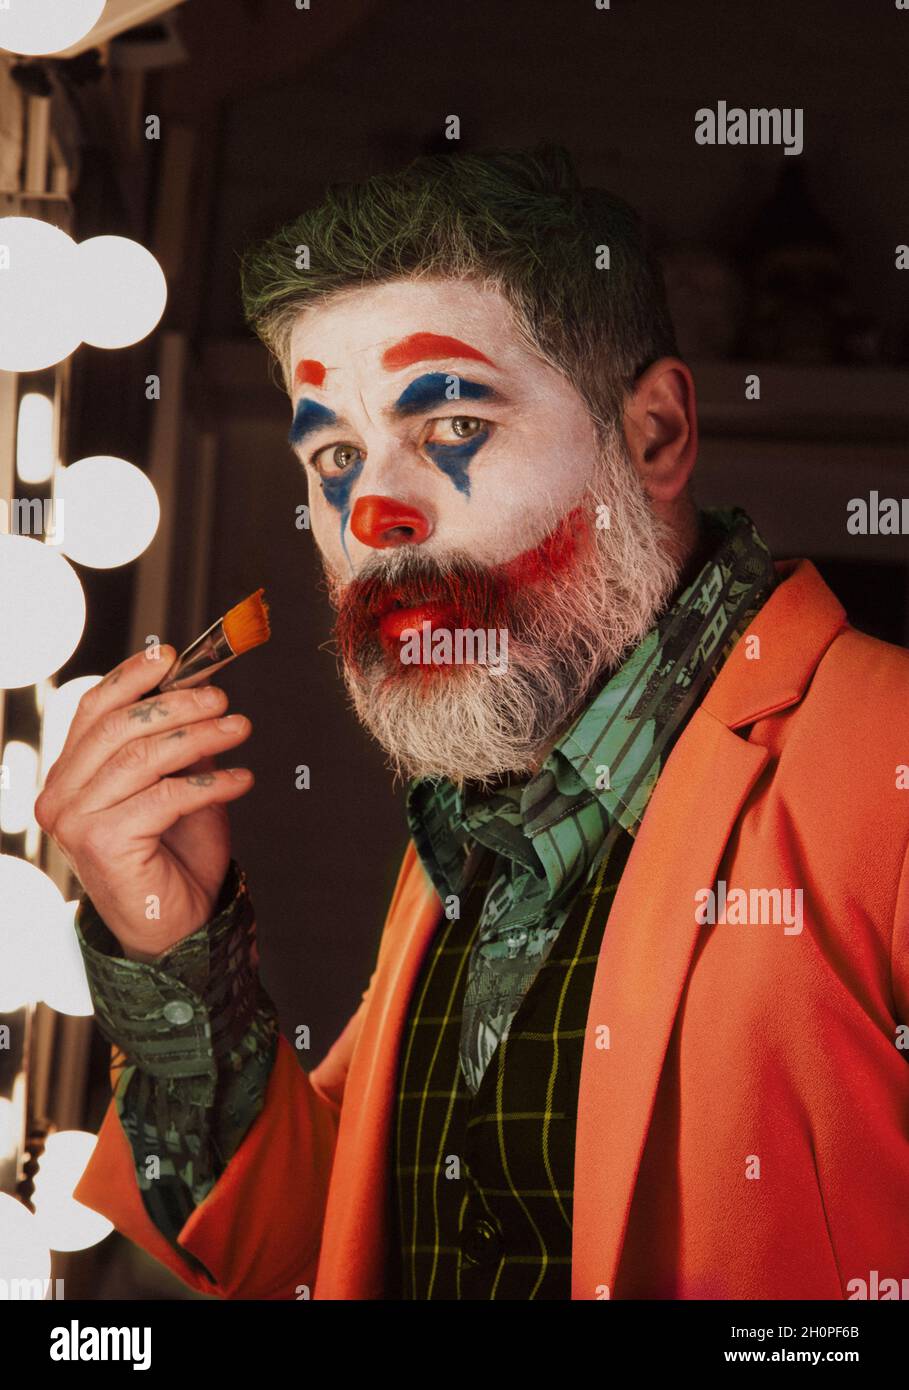 Male portrait of the man who puts on makeup imitating the Joker For the Hallowen holidays Stock Photo